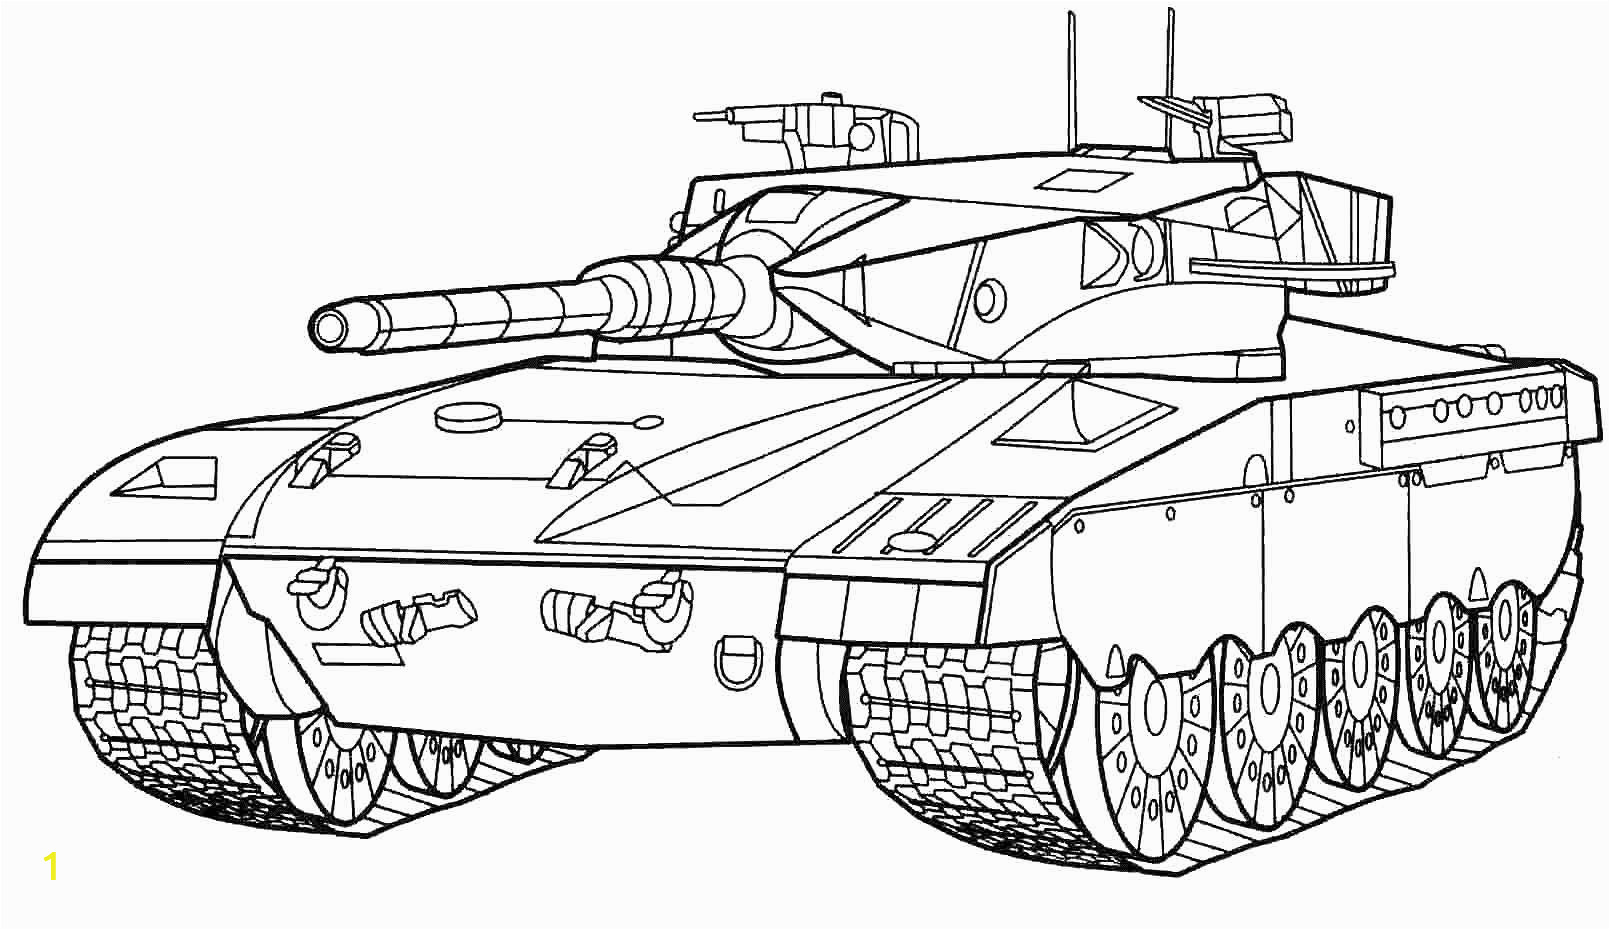 Army Tank Coloring Pages to Print Printable Tank Coloring Sheet Army Military Armode Image